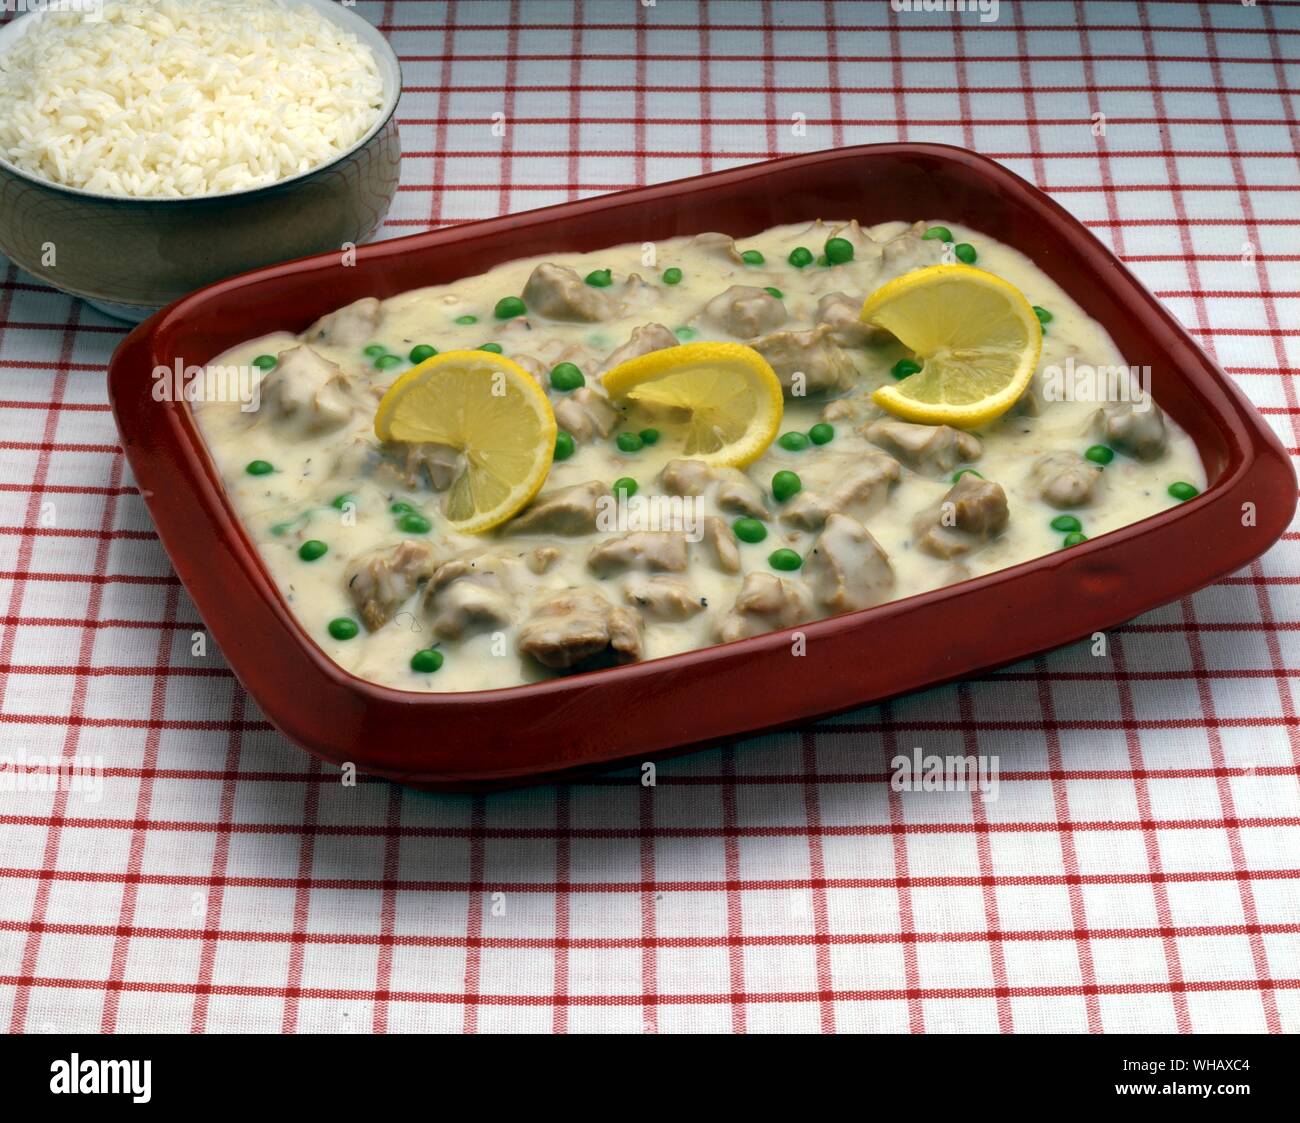 stewed veal in a cream and lemon sauce Stock Photo